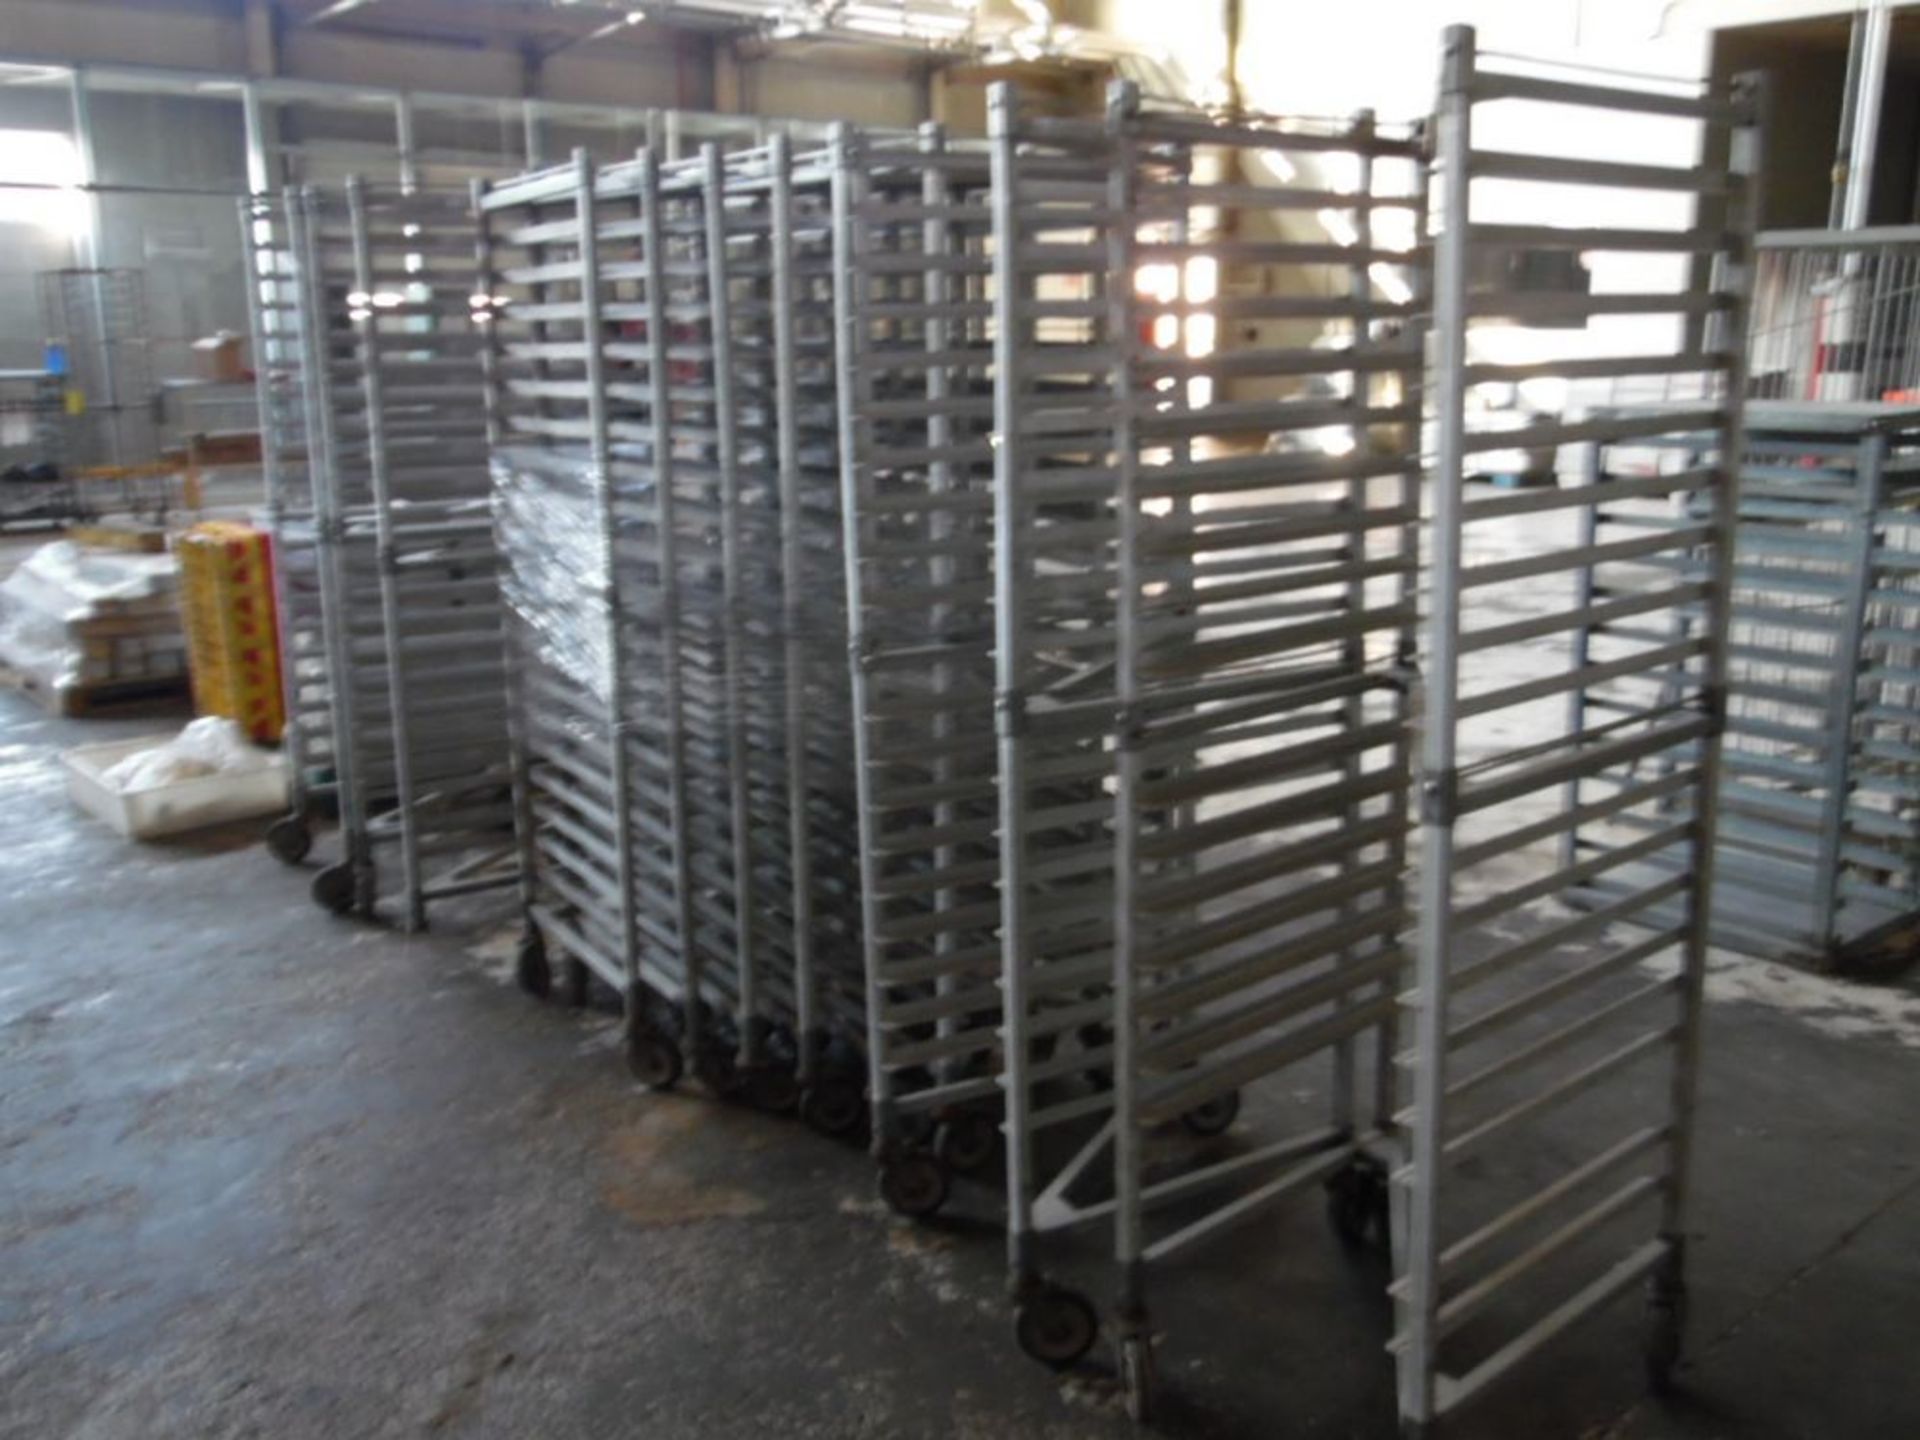 LOT OF 10 CARTS EXPERIENCE OF 20 TRAYS EACH WITH 45 CM WIDTHS FOR 65 LONG.(rigging fee $15.00 - Image 2 of 2